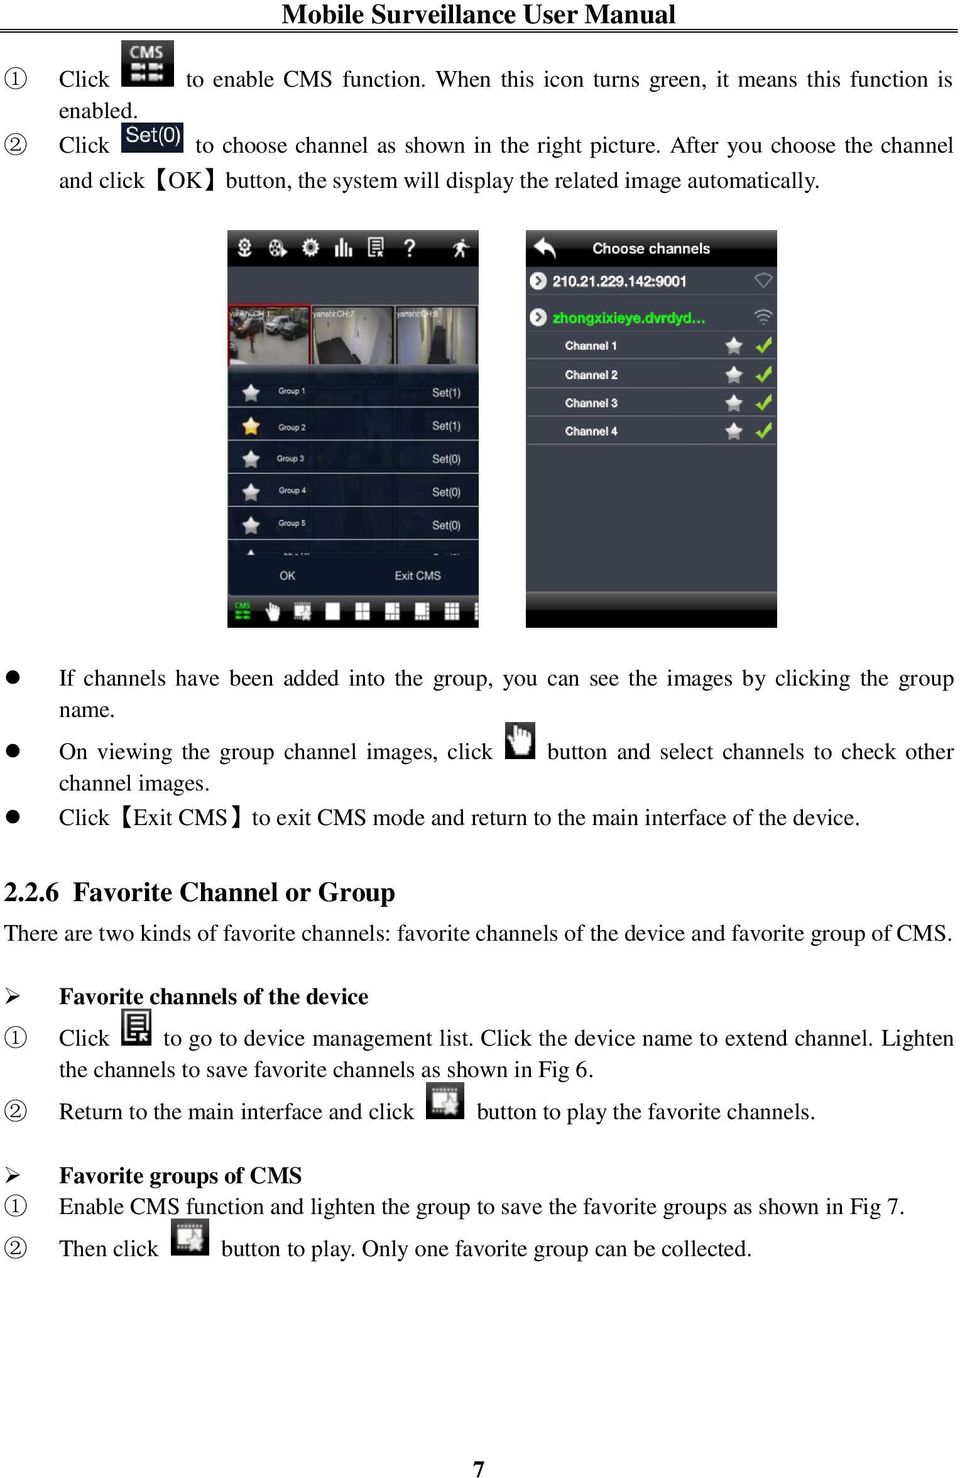 If channels have been added into the group, you can see the images by clicking the group name. On viewing the group channel images, click button and select channels to check other channel images.